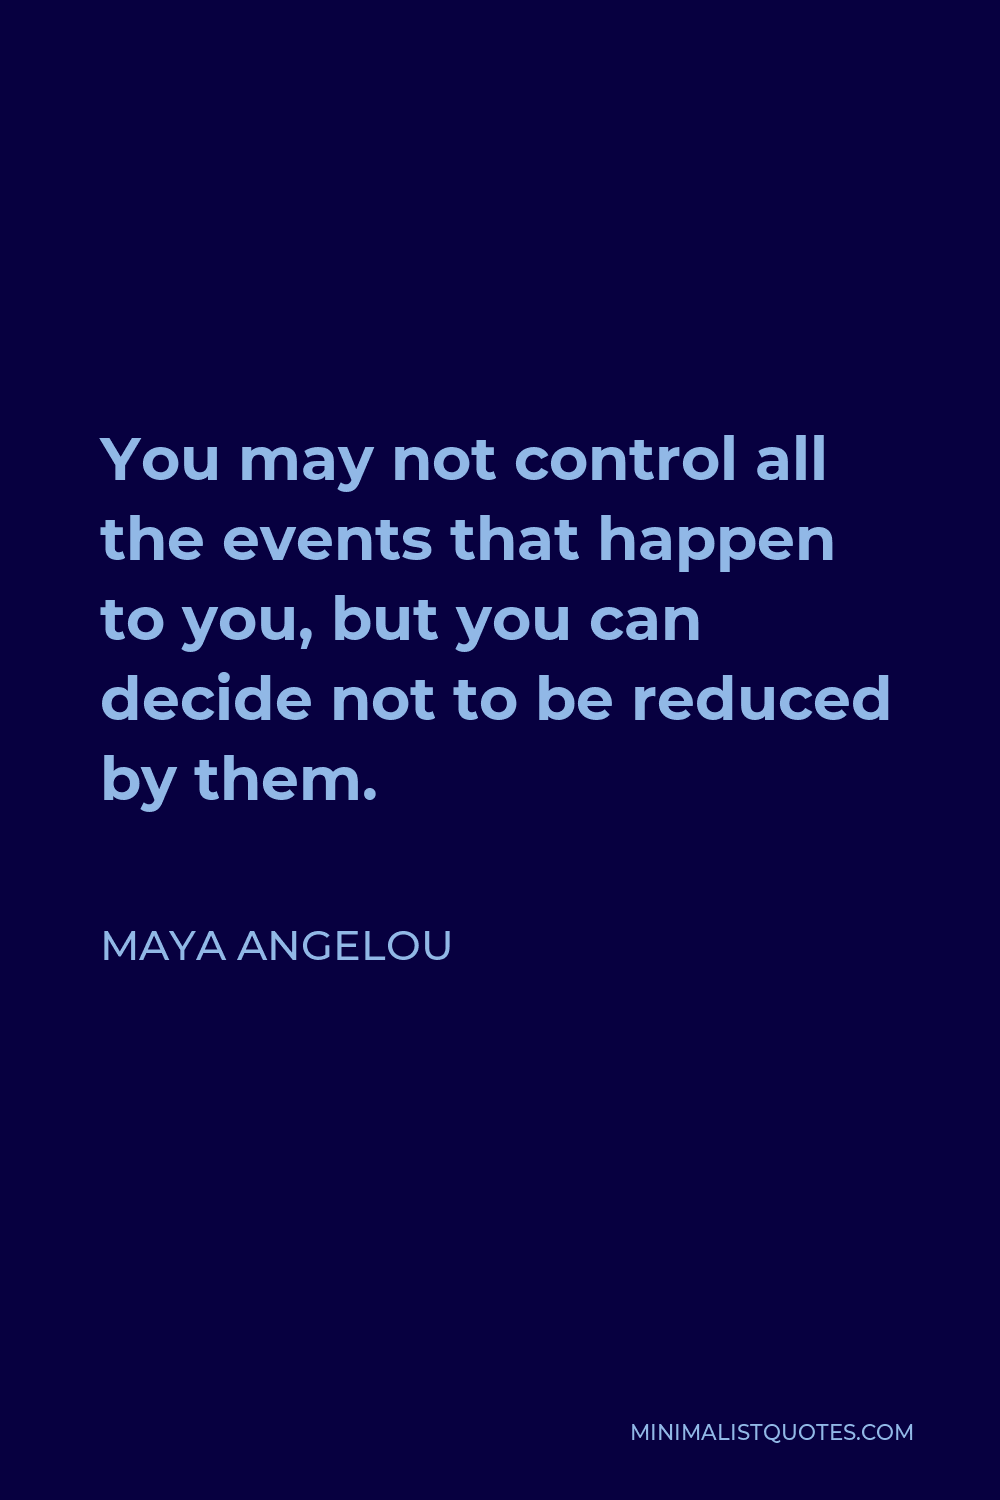 Maya Angelou Quote: You may not control all the events that happen to ...